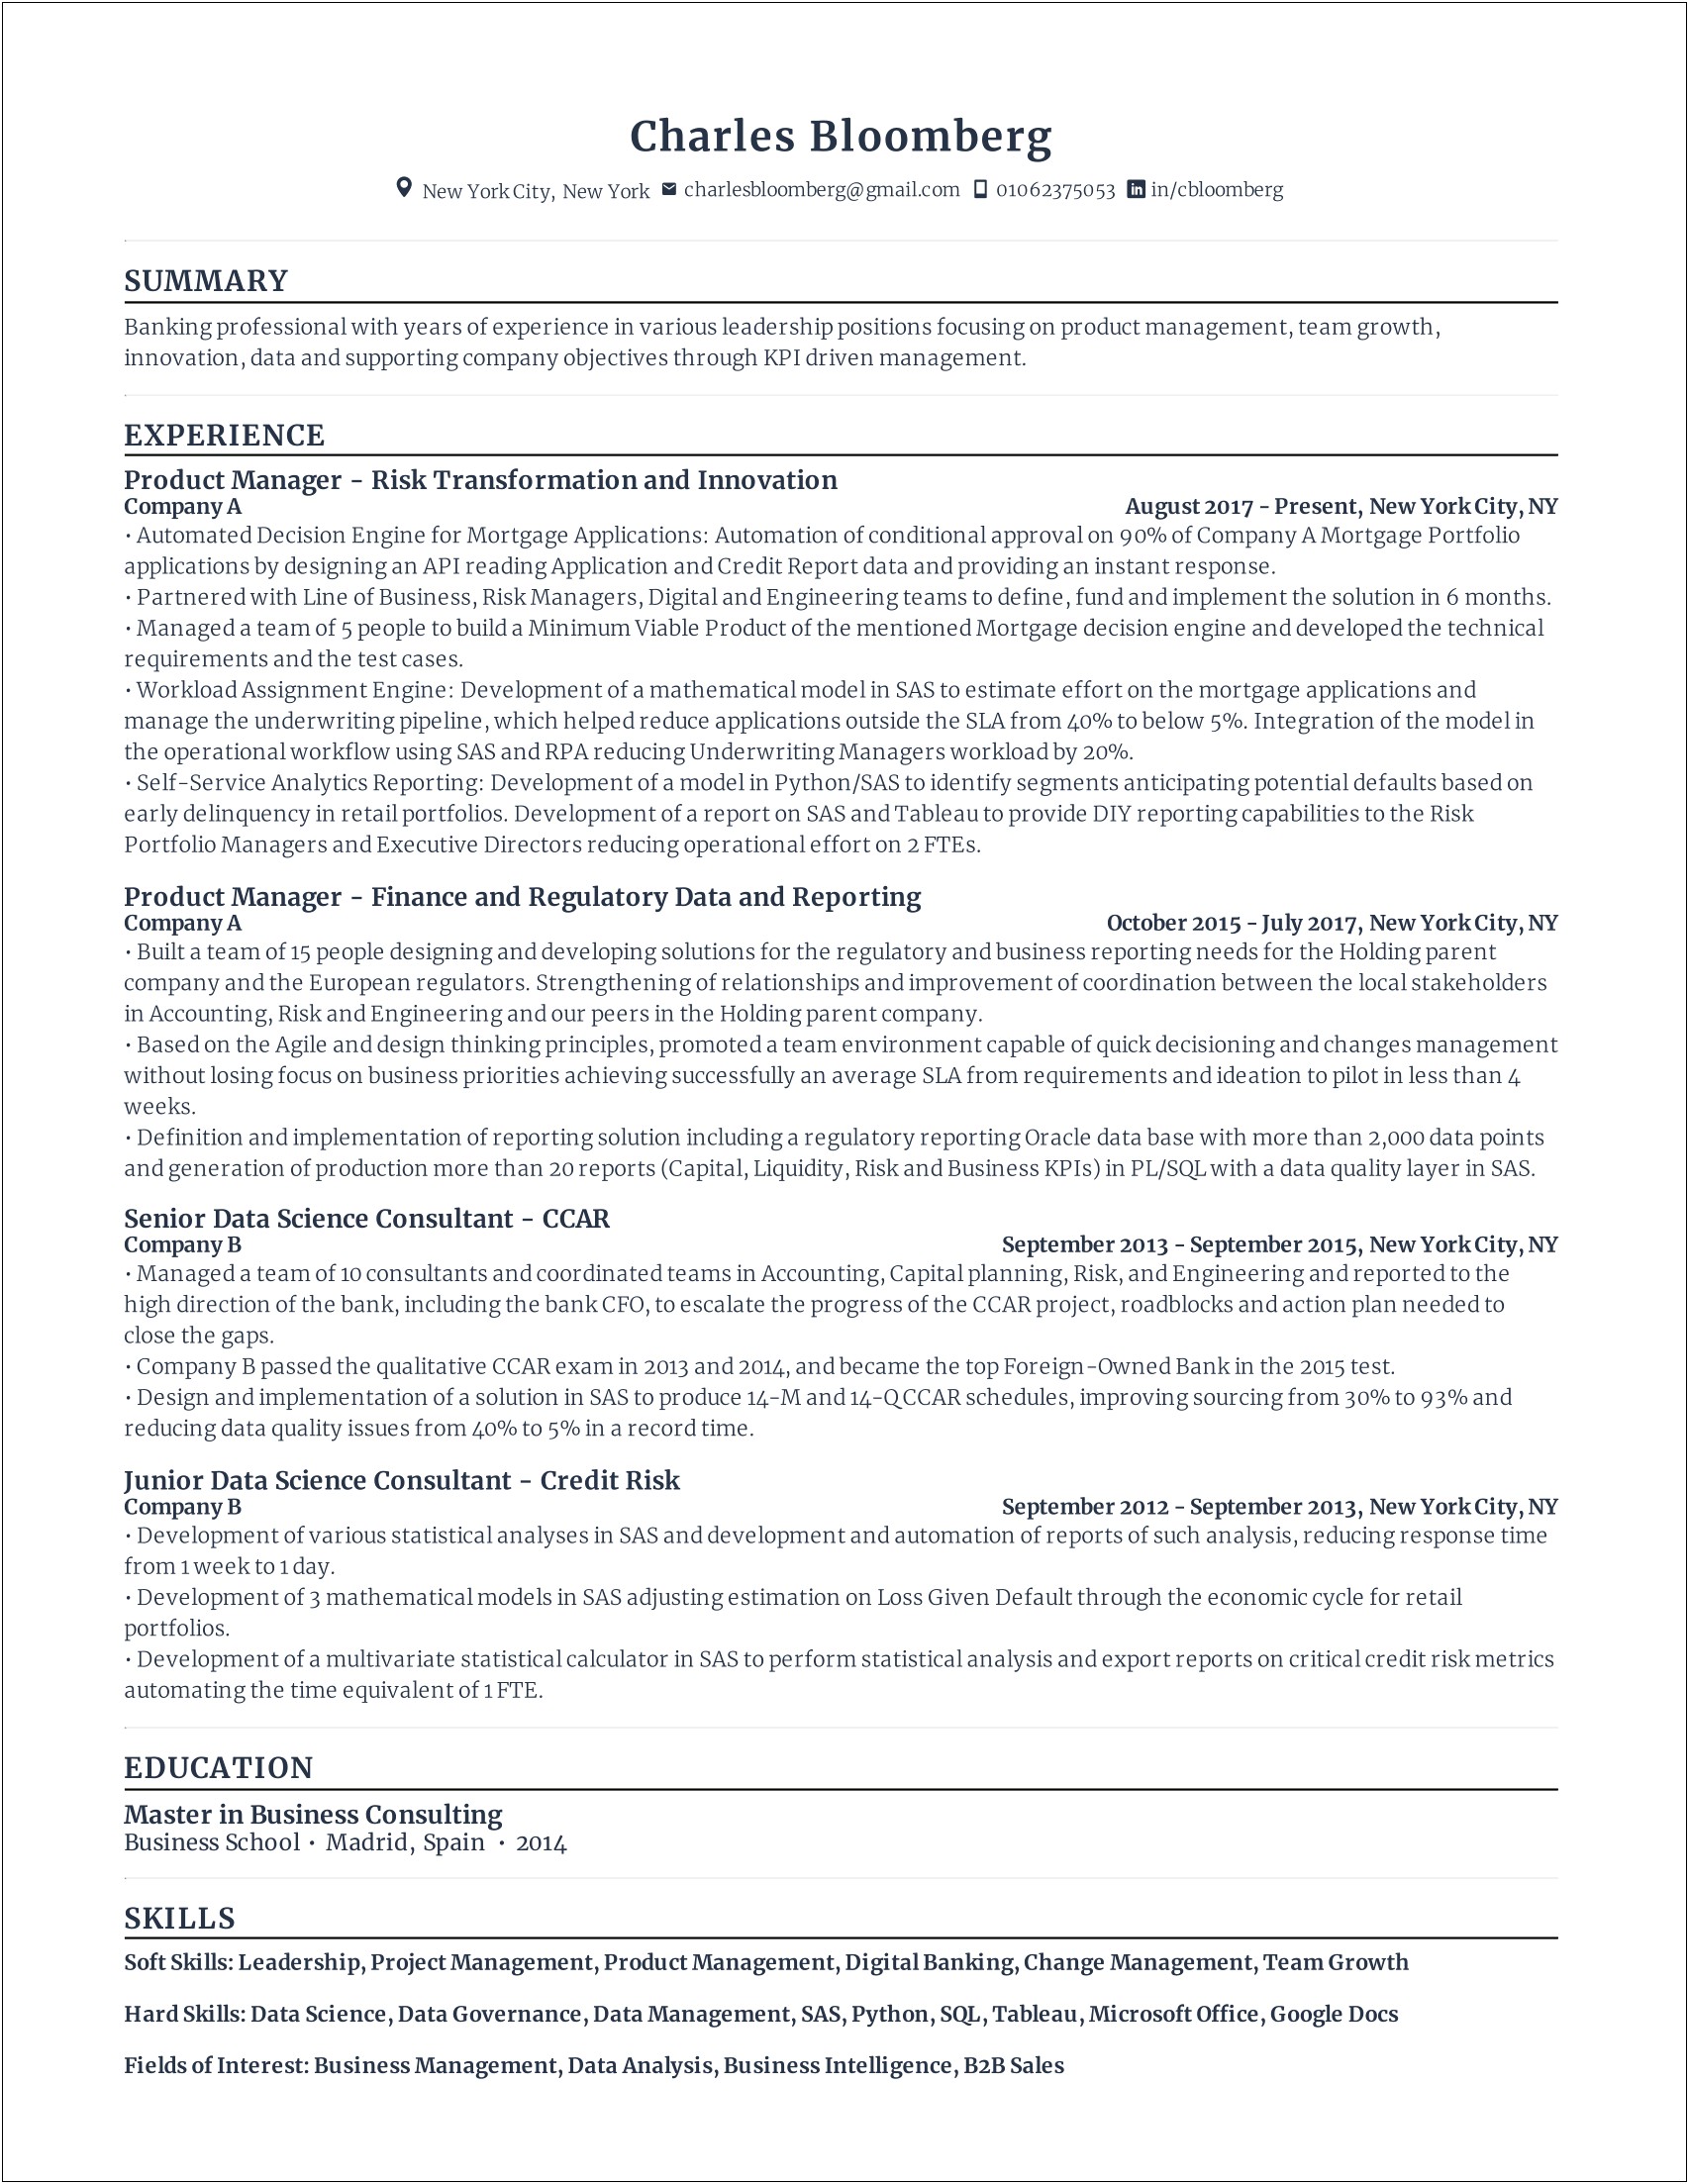 Resume Summary For A Product Manager